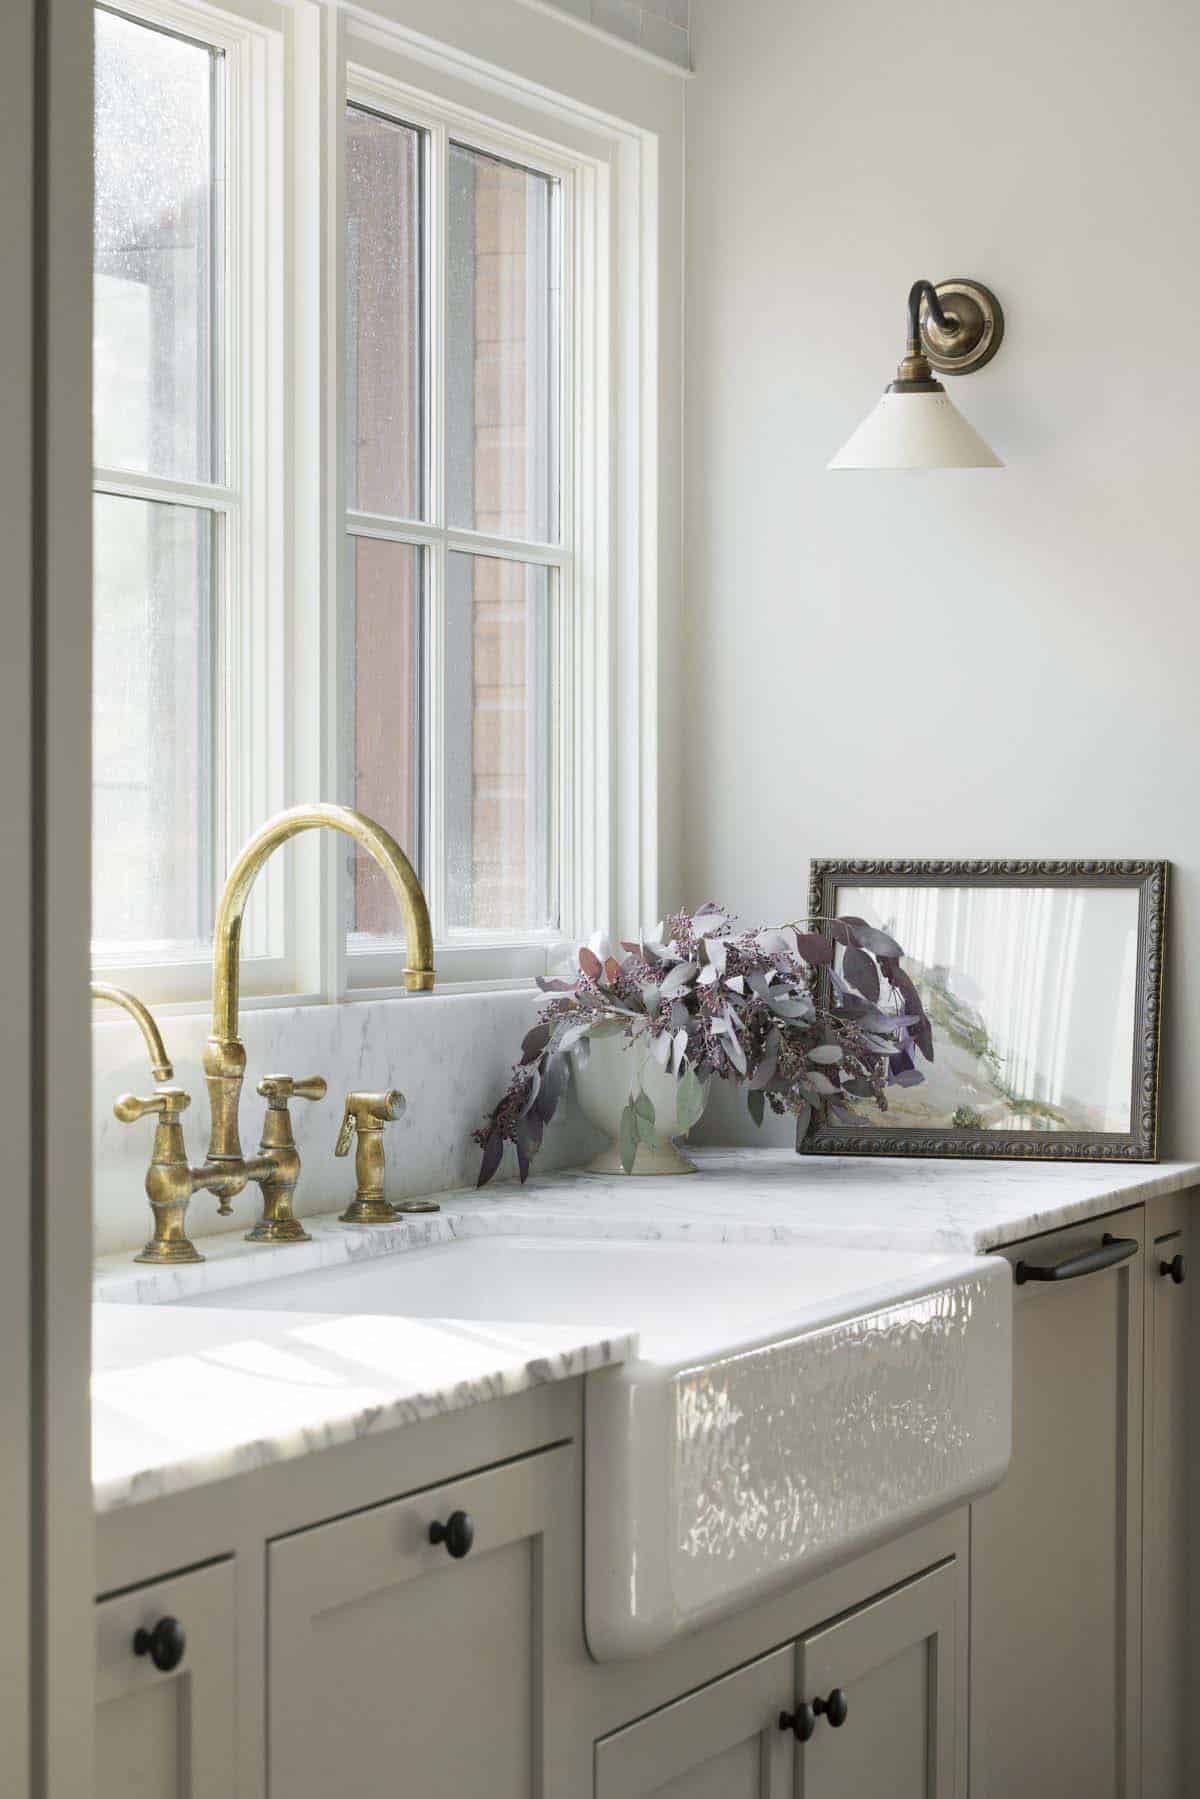 transitional kitchen sink wall with a window